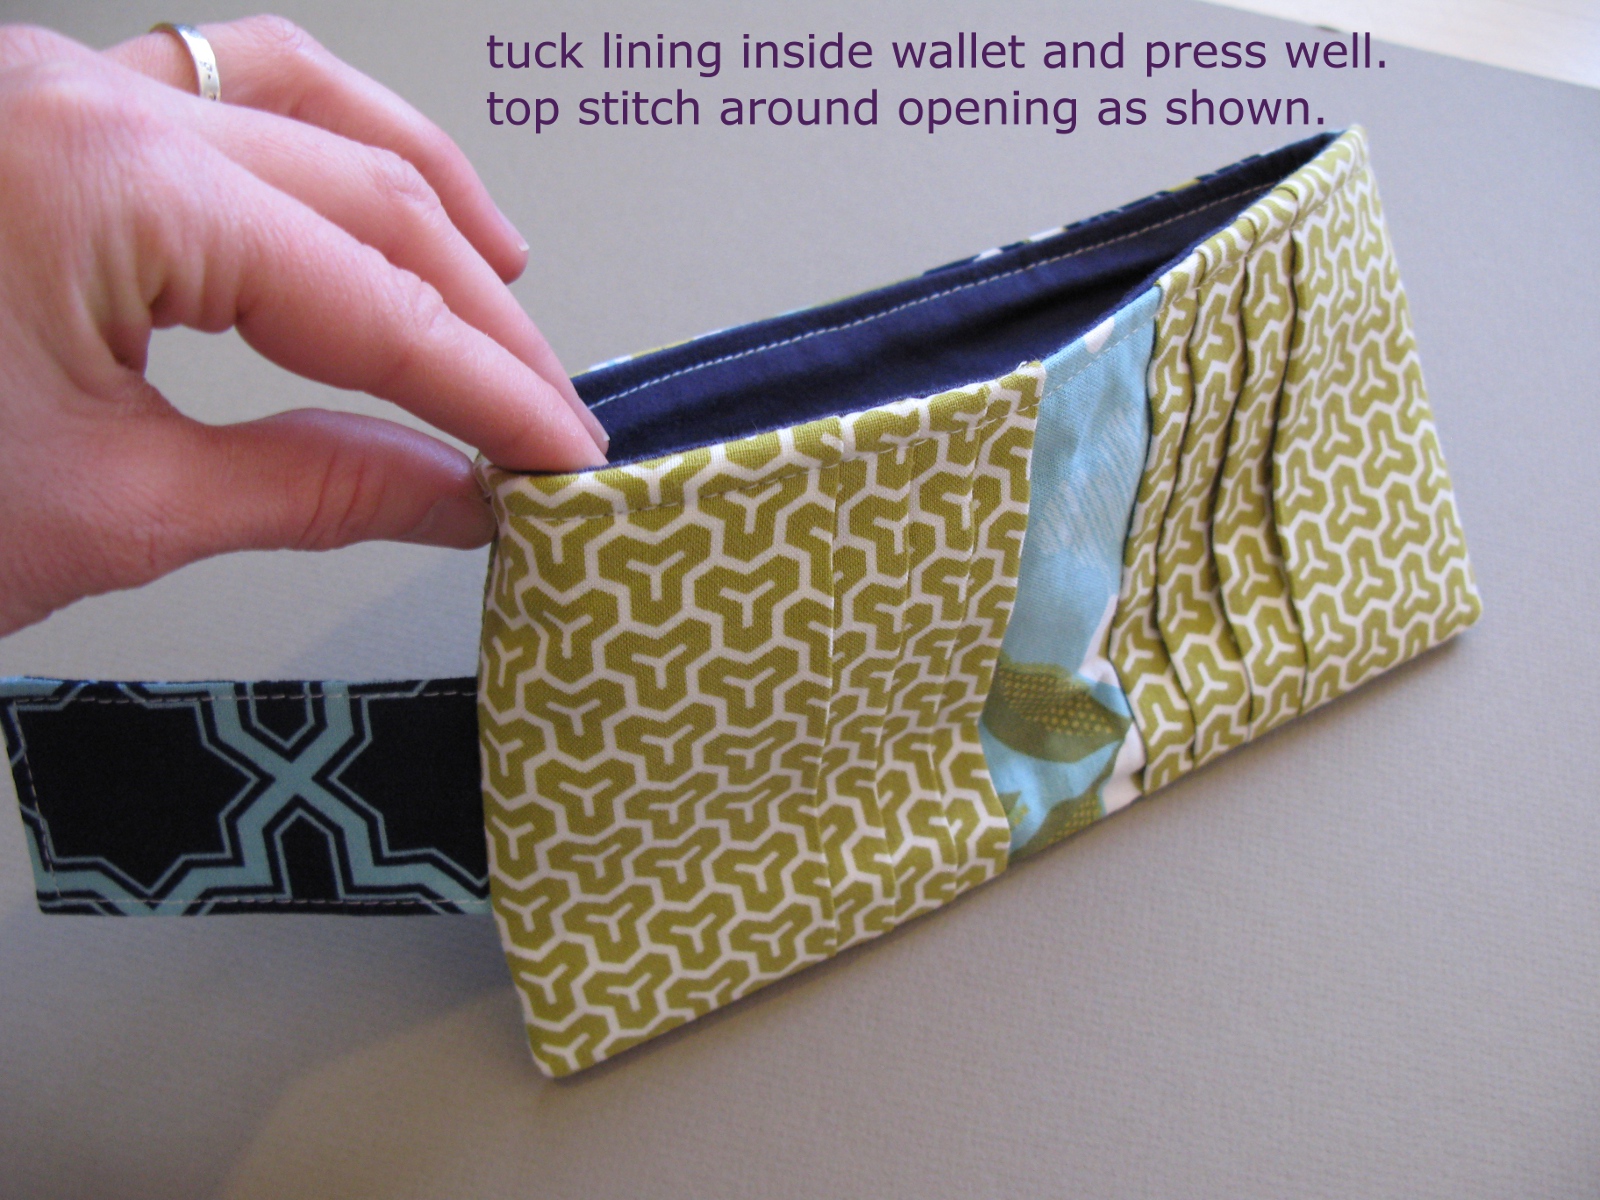 How to sew a wallet with RFID blocking fabric - Sewspire